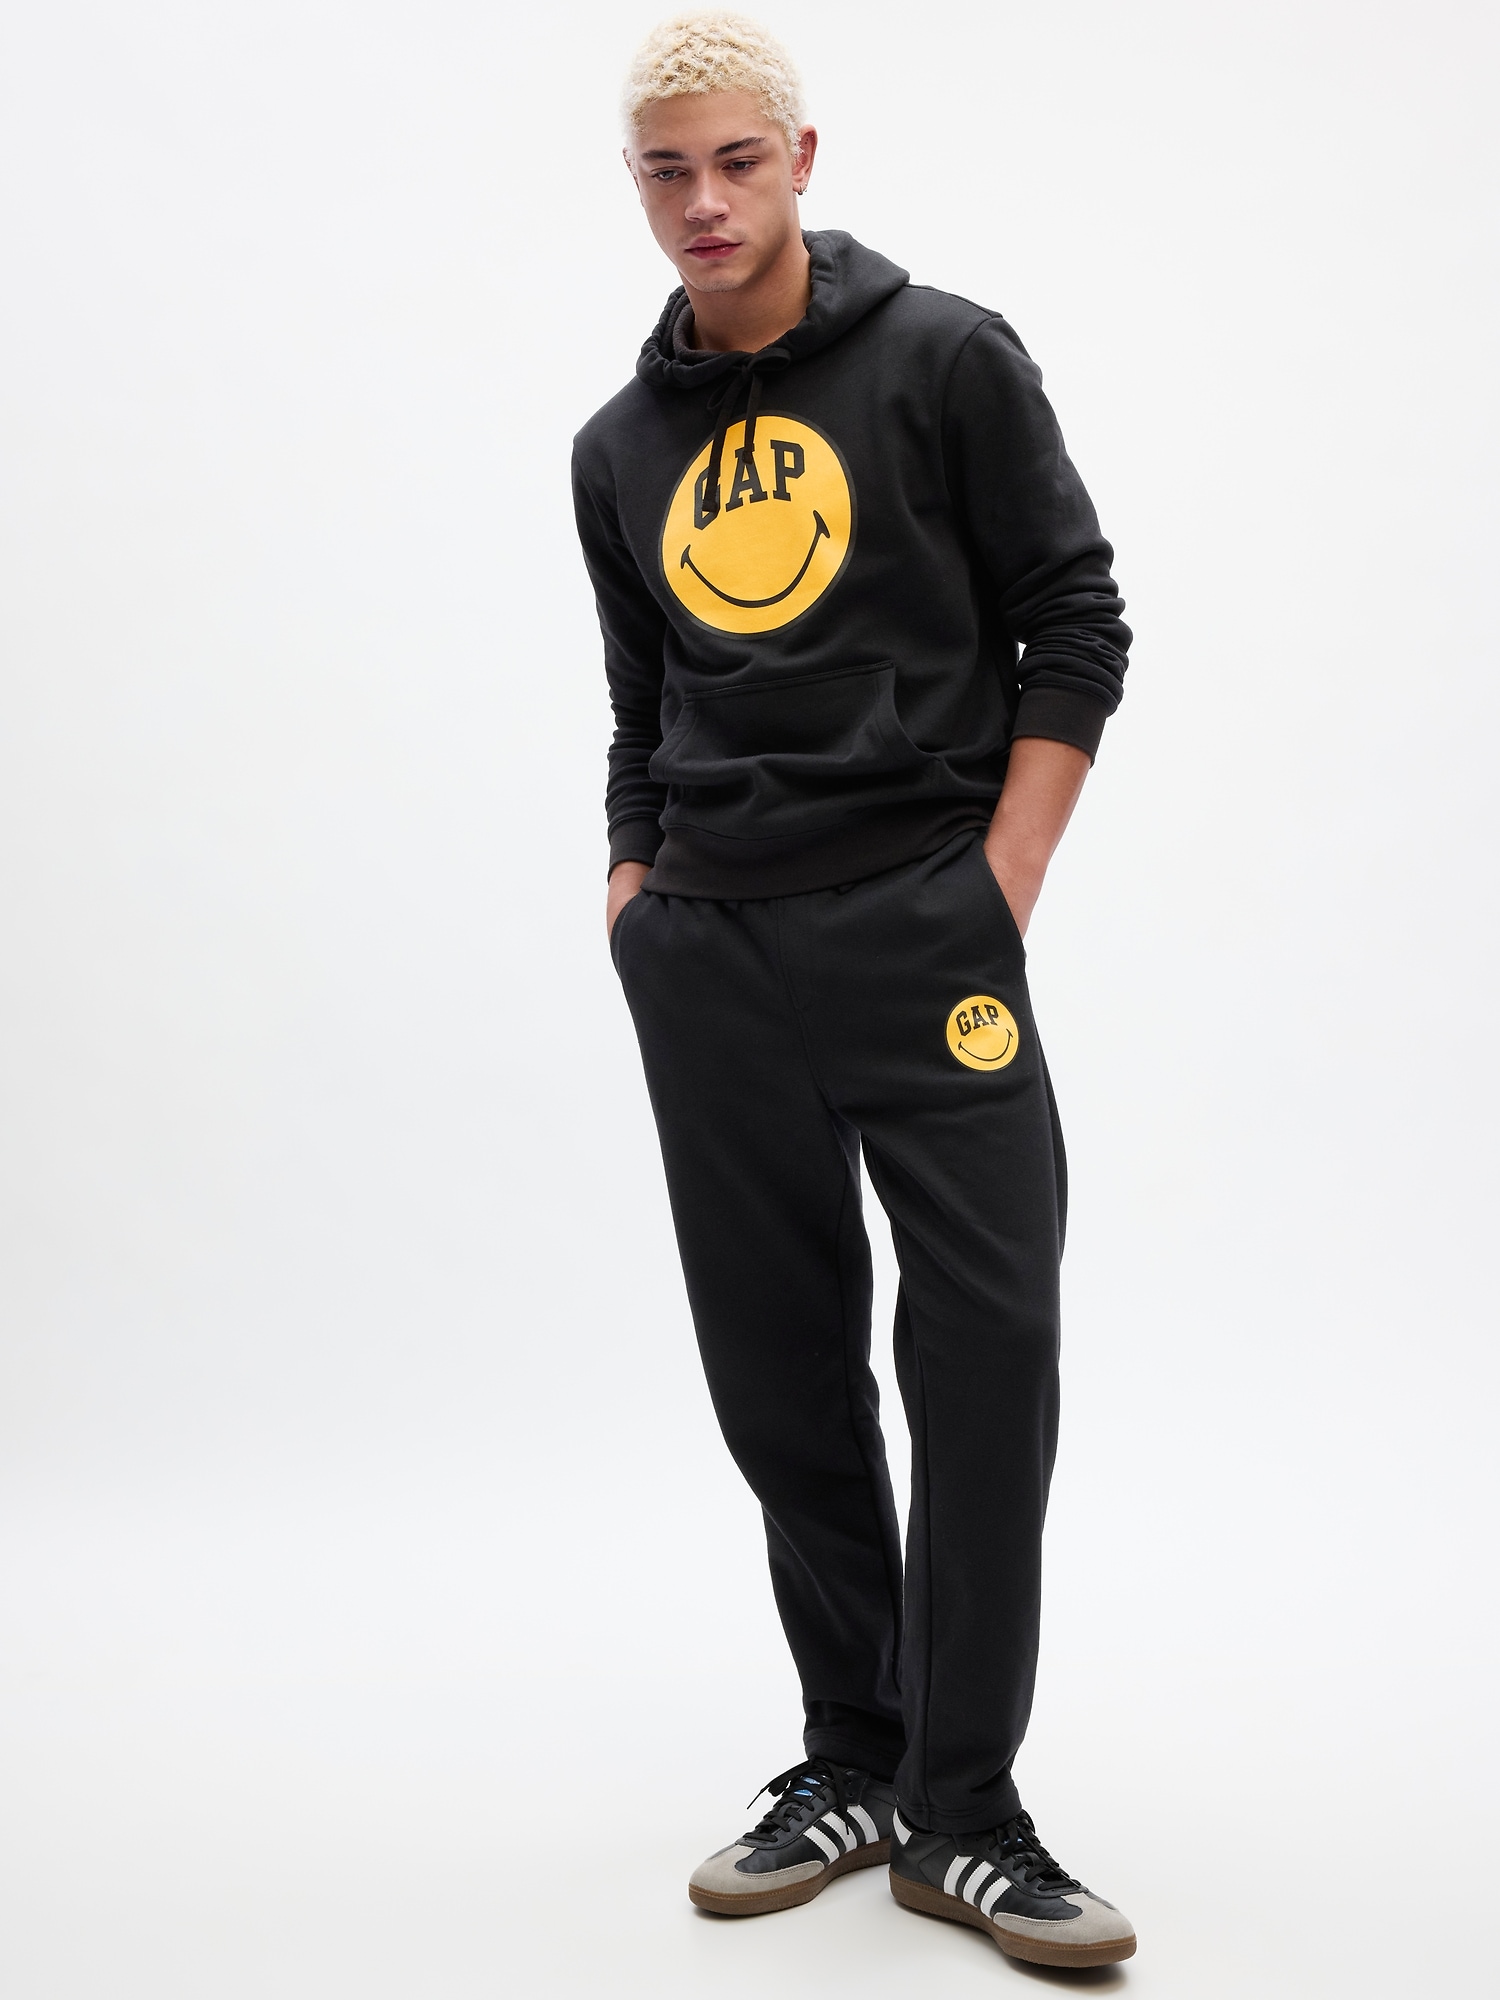 adidas neo x SMILEY Crossover Smly Tp 1 Contrasting Colors Bundle Feet  Sports Pants/Trousers/Joggers 'Black' - HB7411 | Solesense